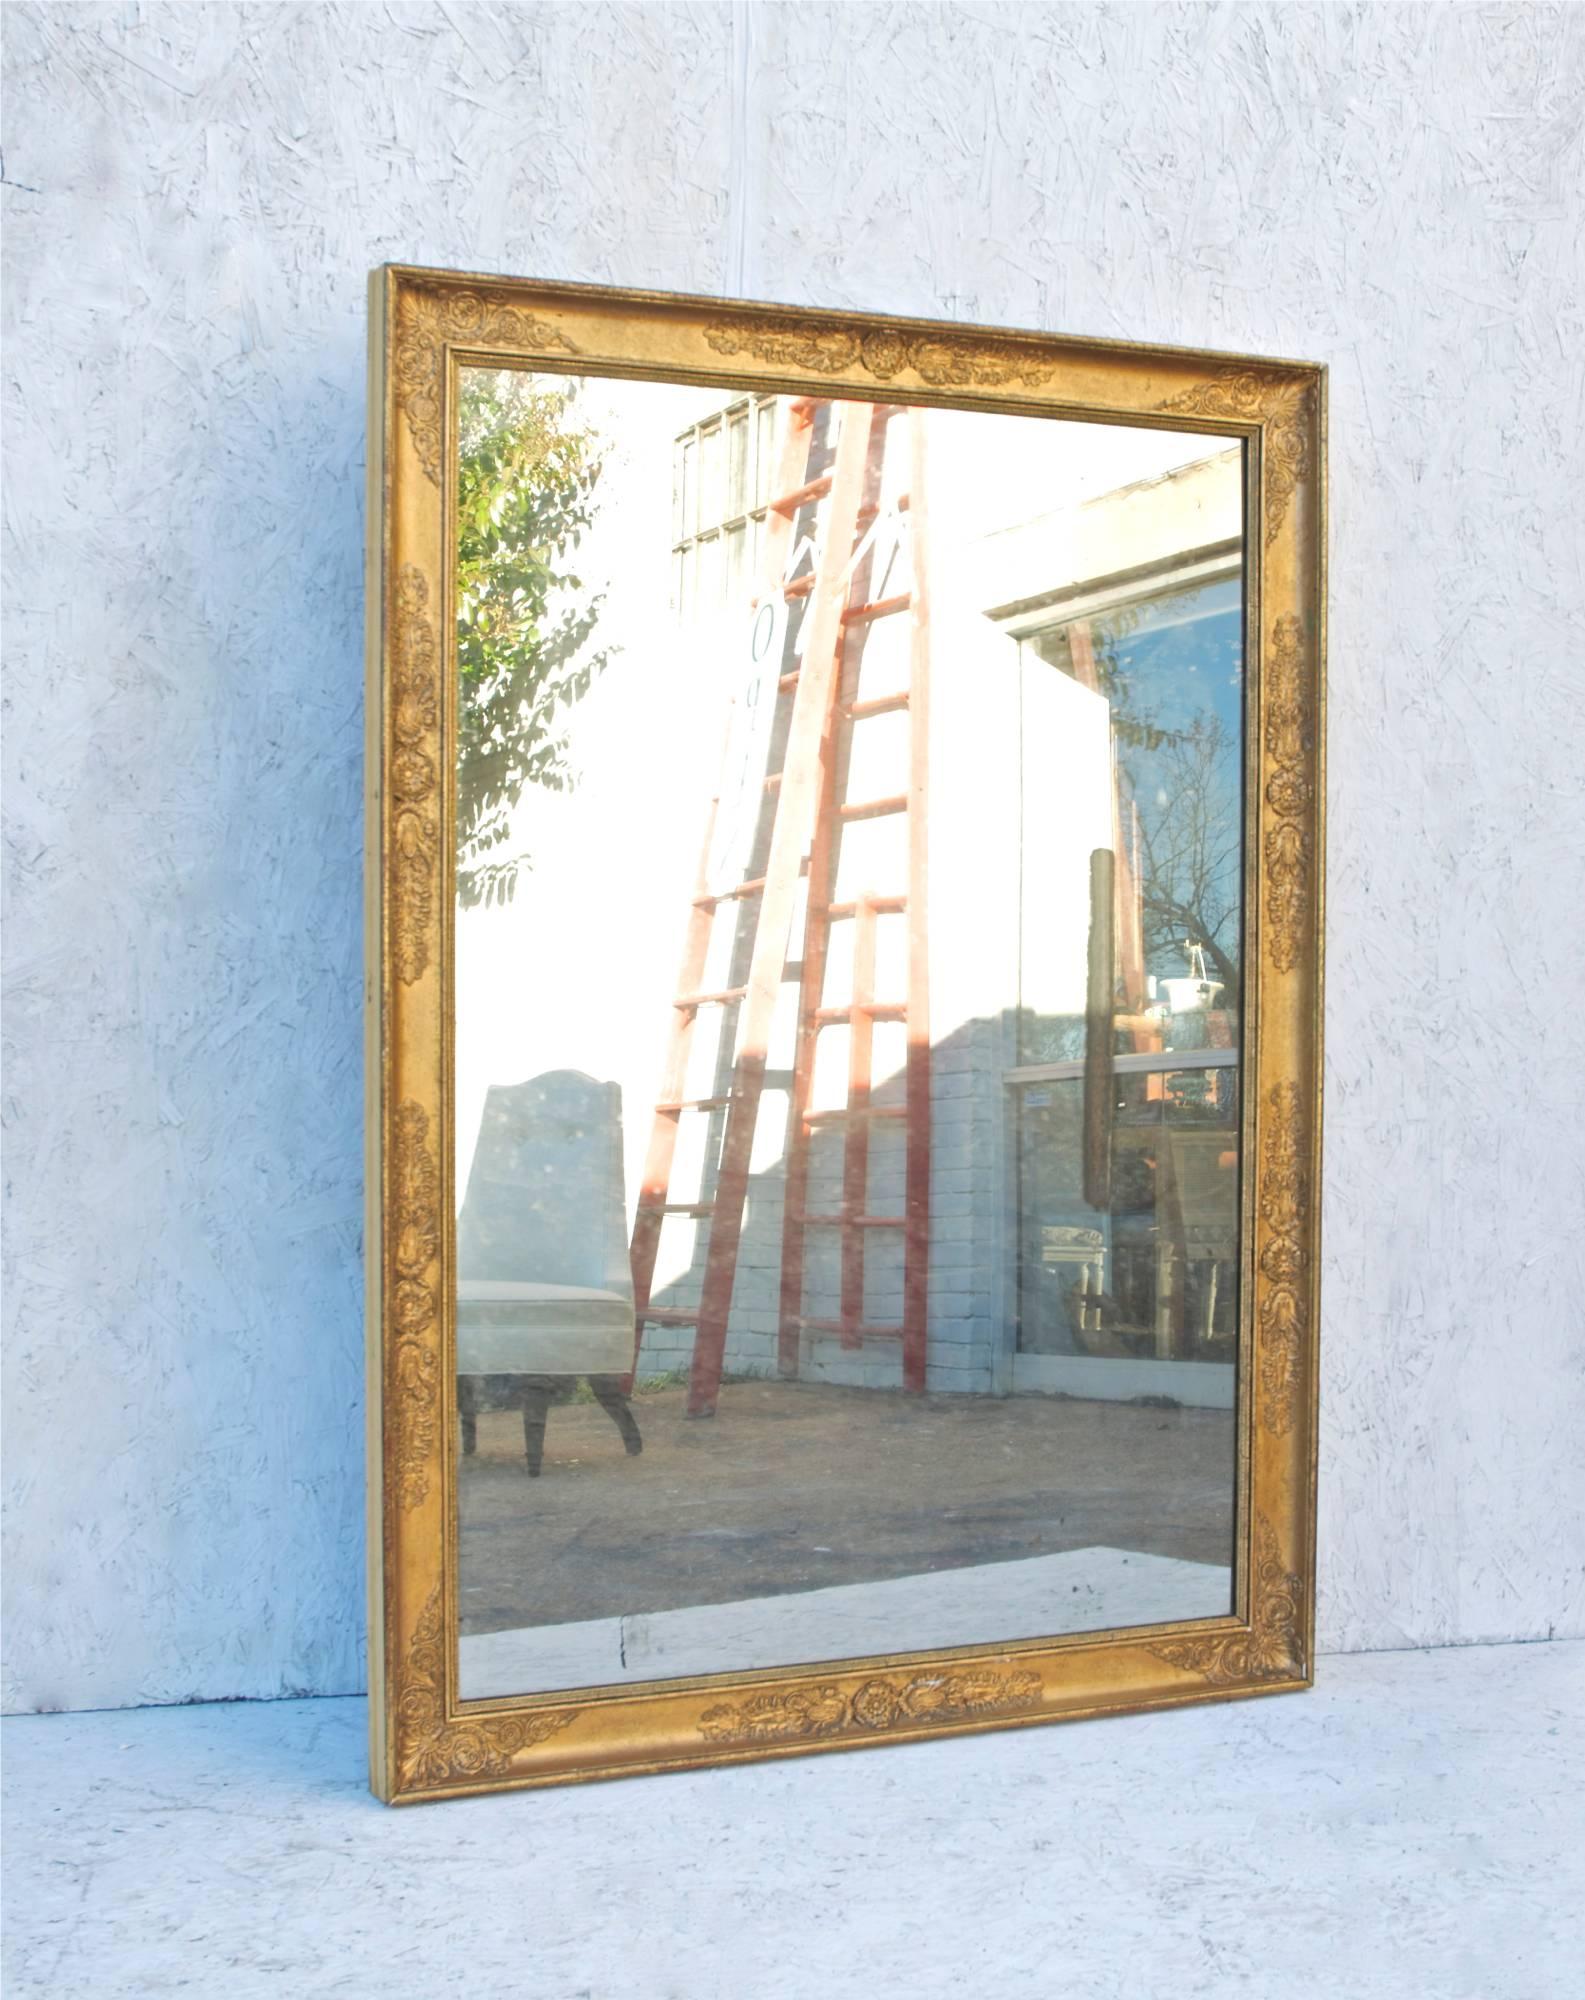 19th century French mirror of a fairly grand scale. This simple rectangular framed, panel backed mirror was more than likely purchased in France, circa 1852-1853 by then U.S. Ambassador to France , William Cabell Rives. The mirror has just been